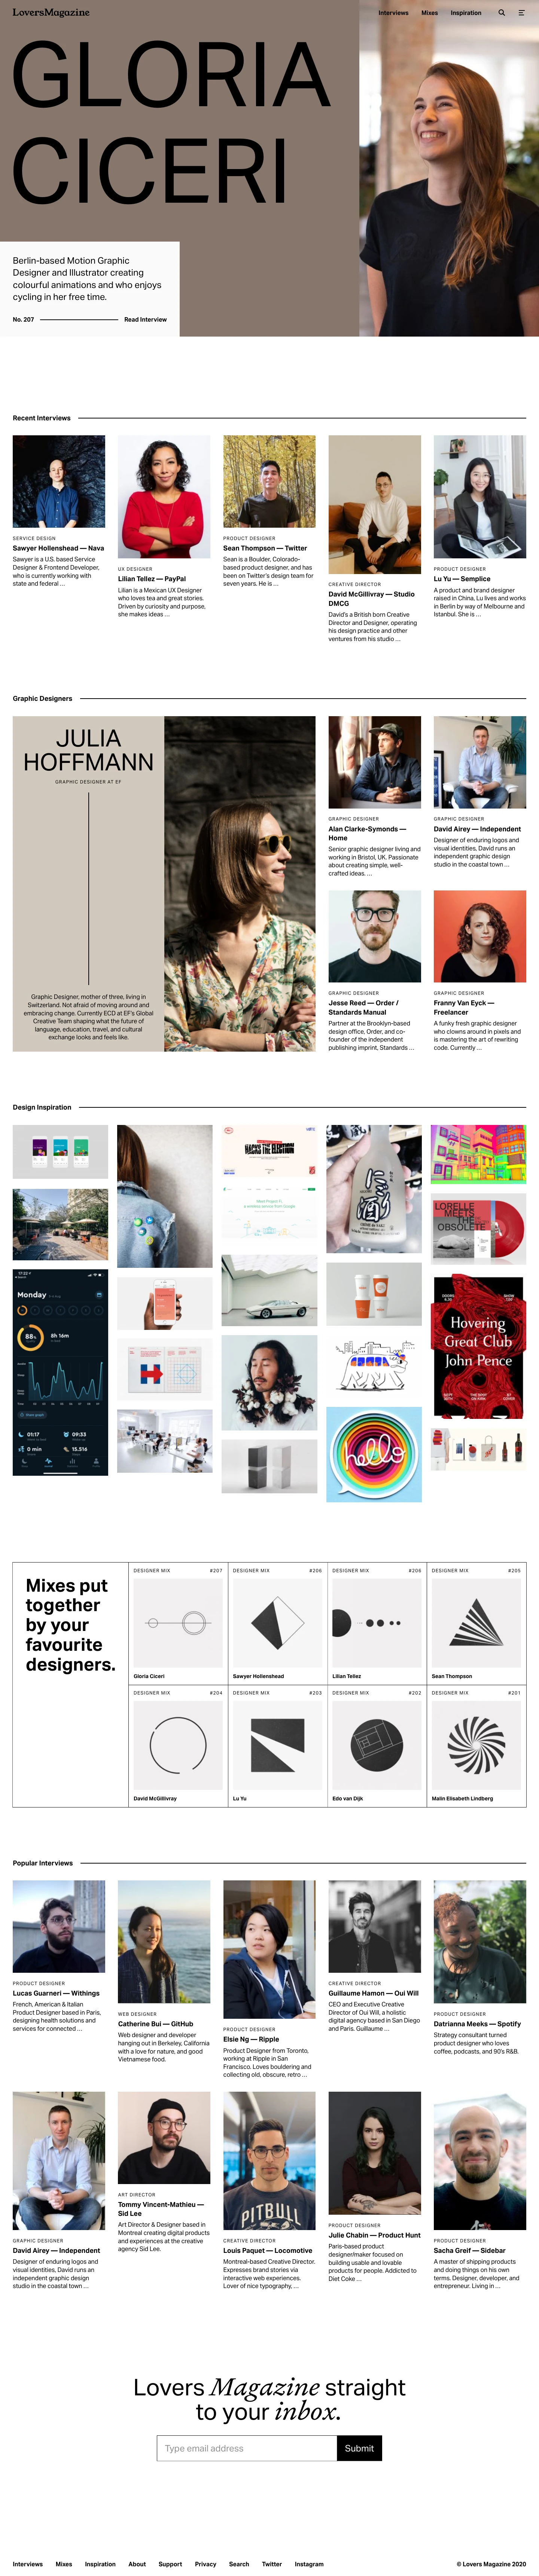 Lovers Magazine Landing Page Example: Lovers Magazine is an online magazine for creative professionals. We put the spotlight on designers from a range of disciplines that are creating the future and touching the lives of many.